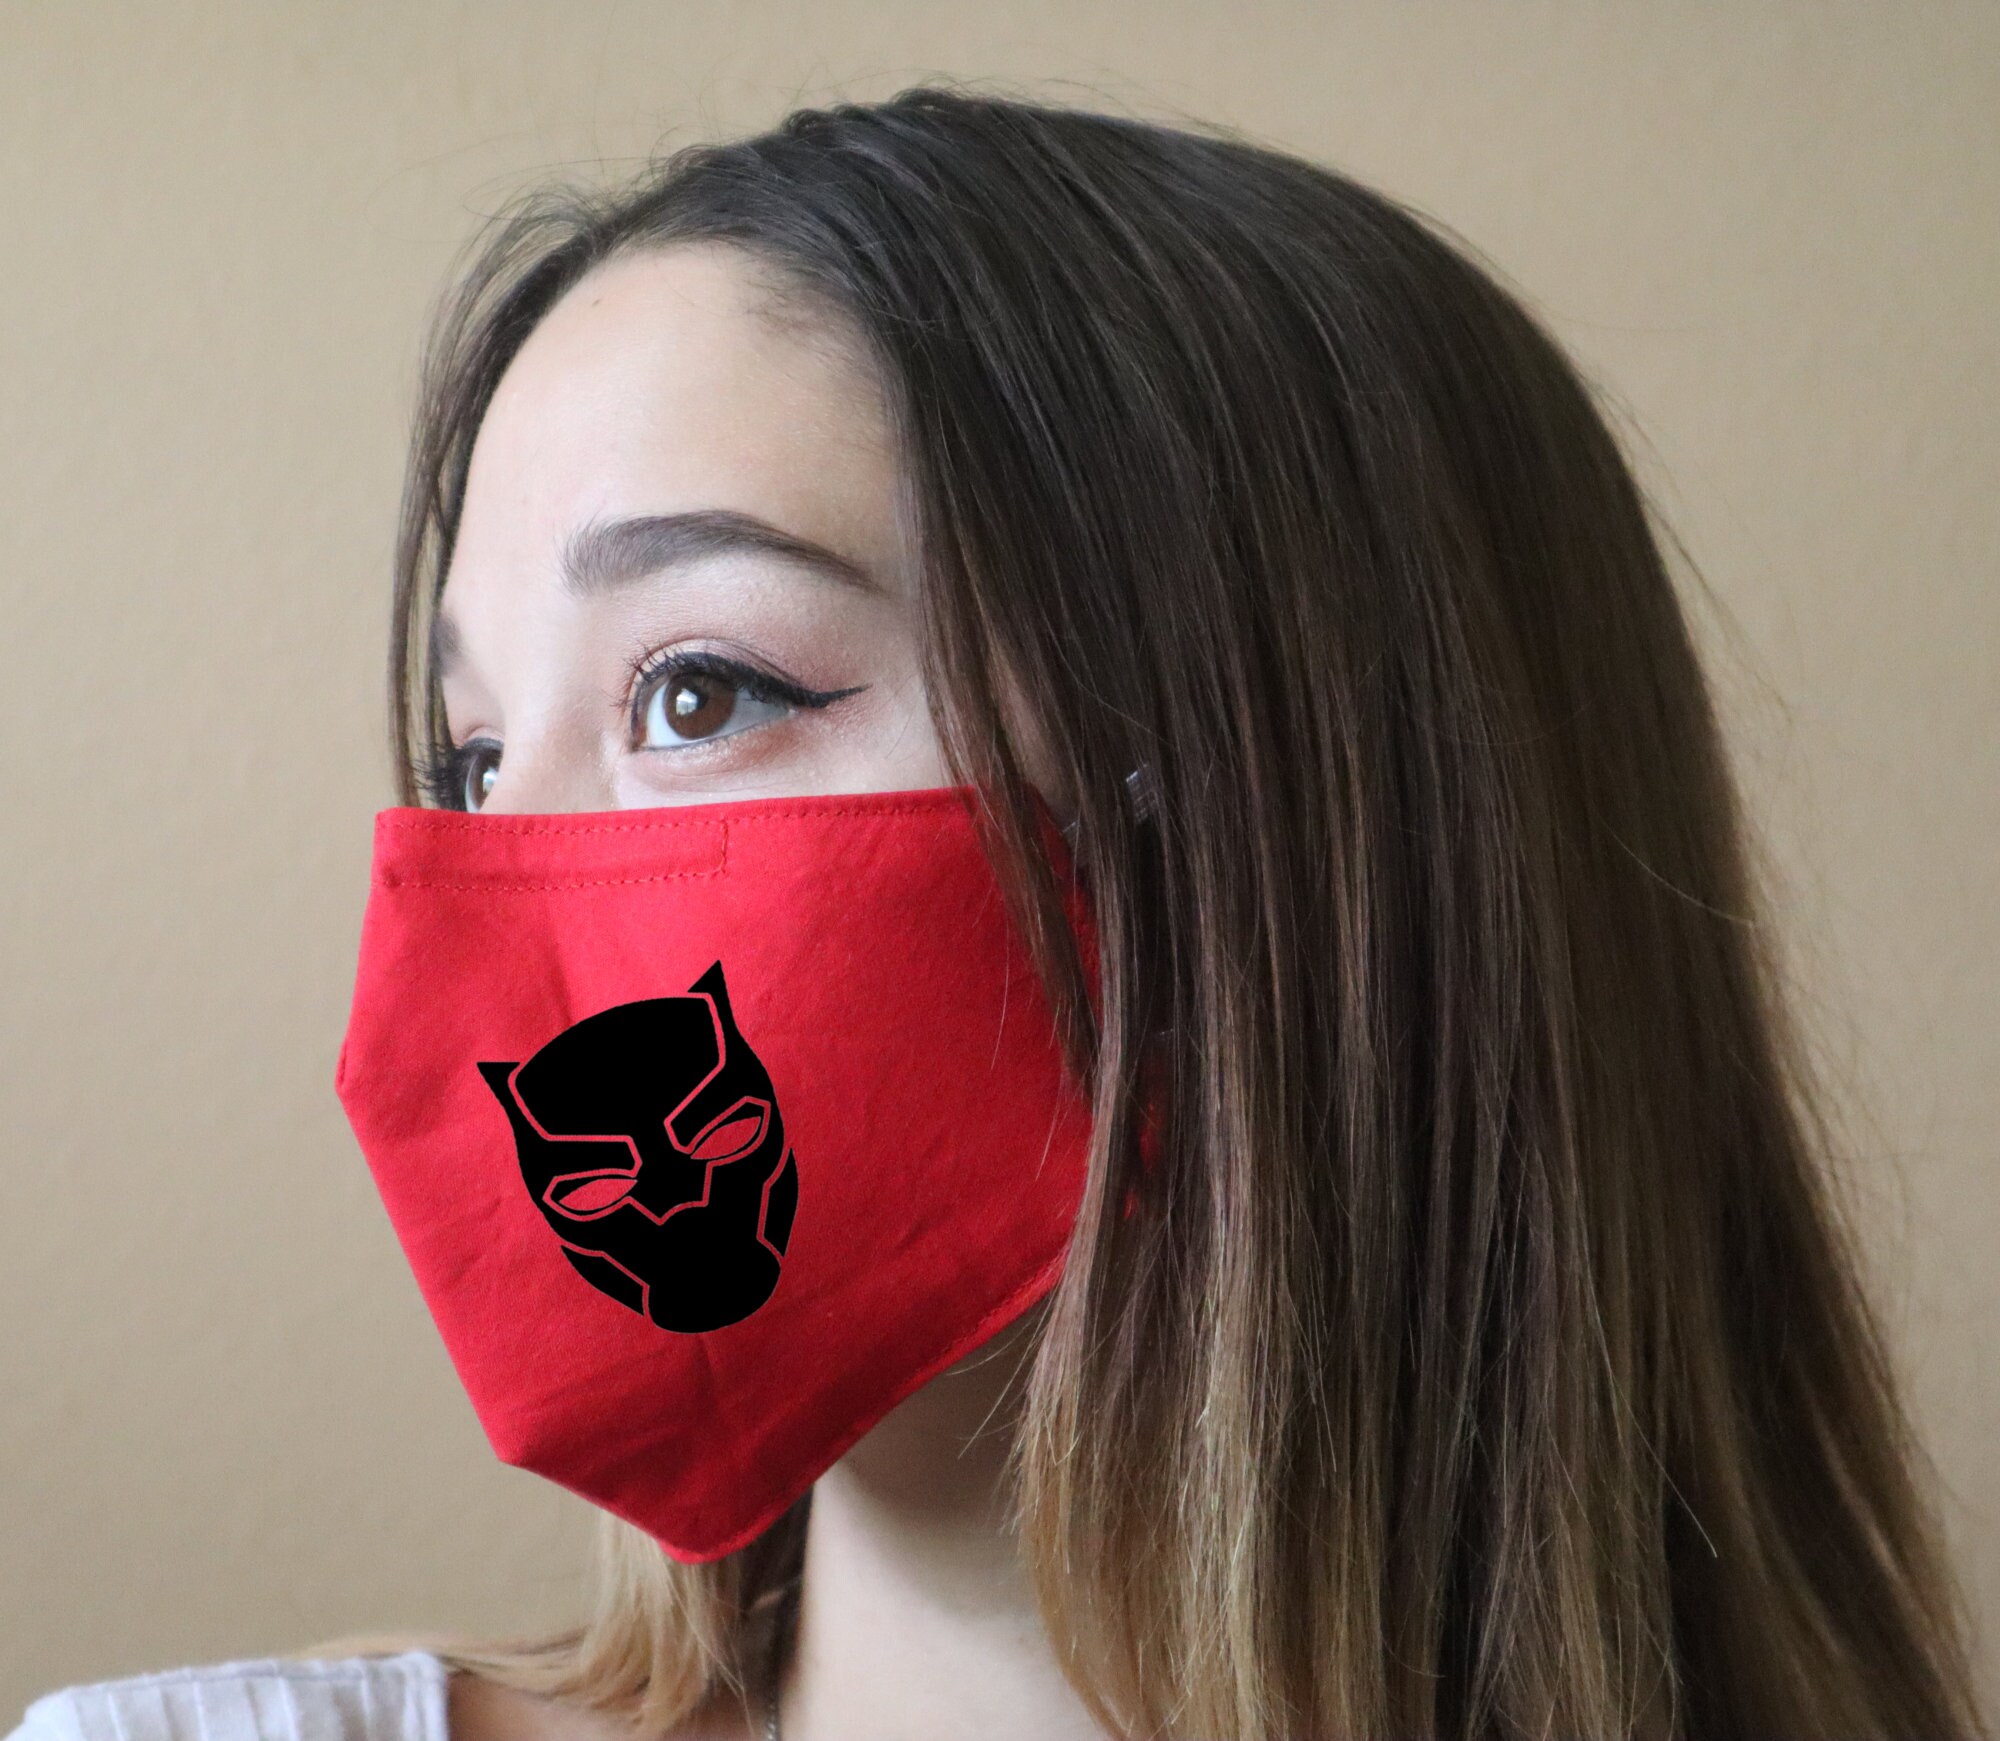 Handmade Cotton Blend Customizable Face Masks With Adjustable Ear-Loops - Super Heroes Black Panther Adult Small 8 X 5"